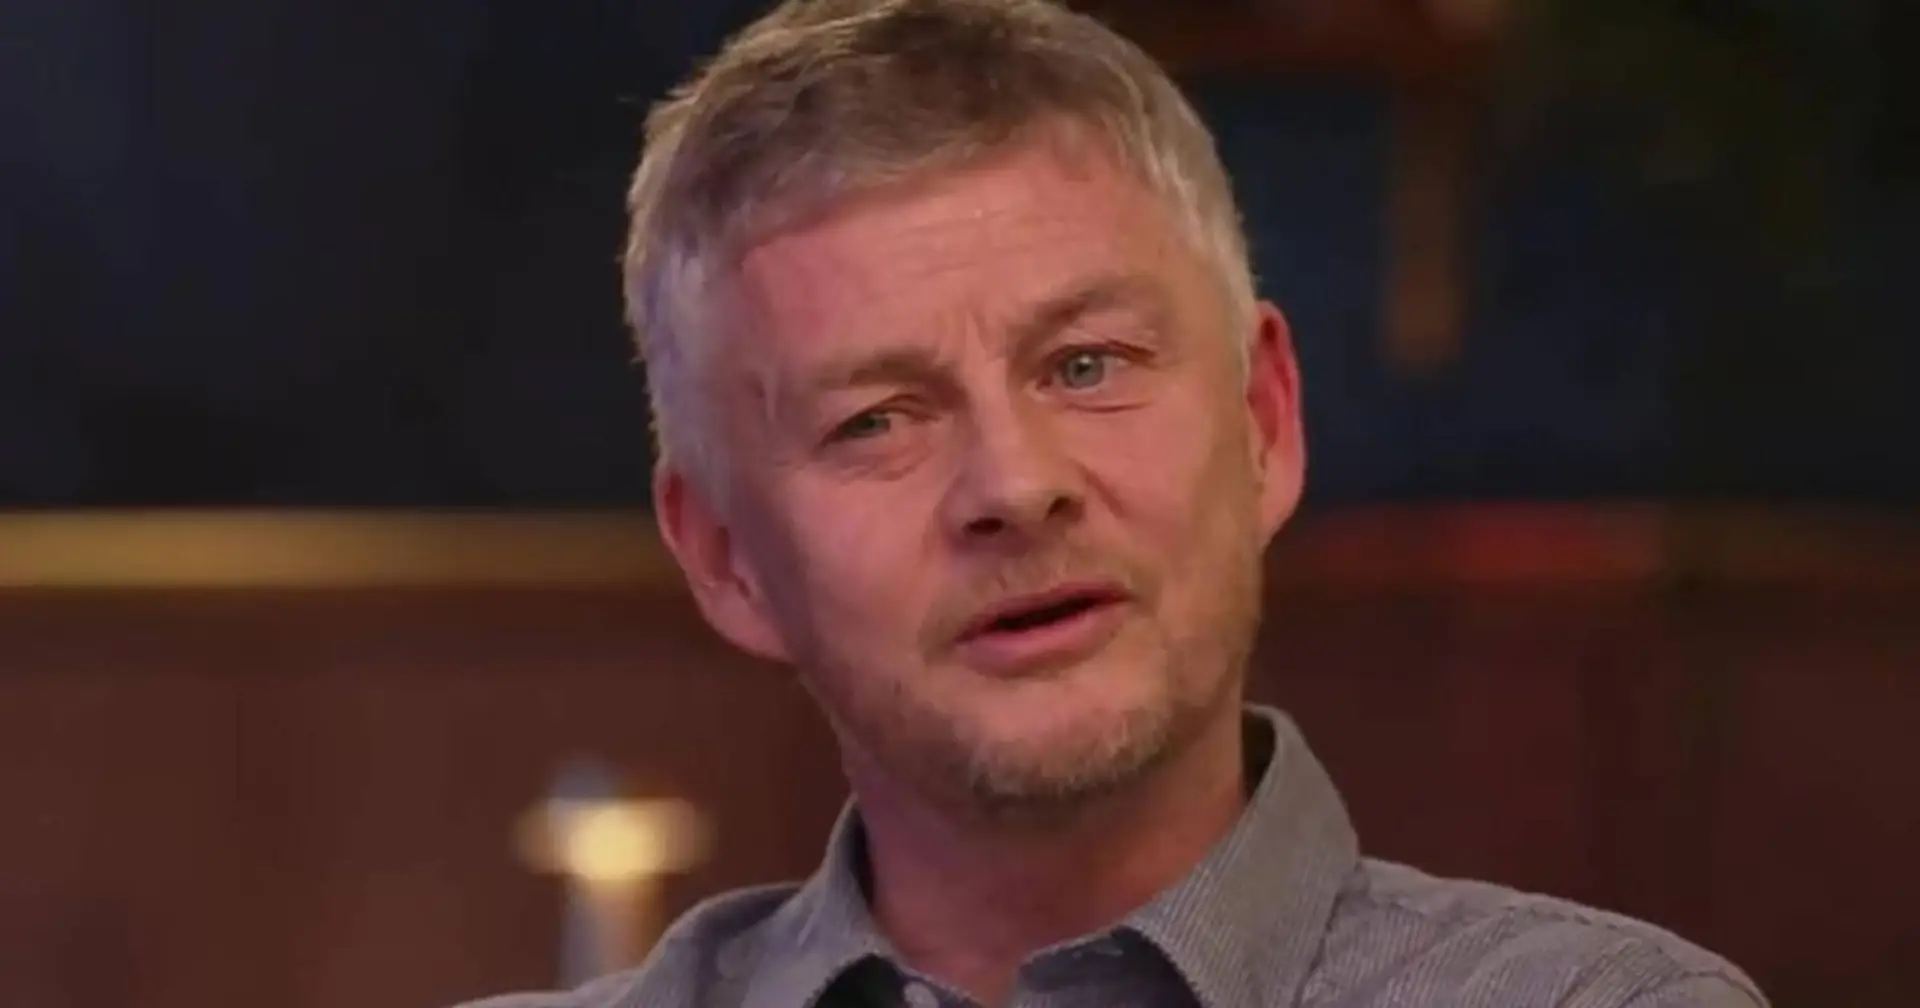 'Was he changing captains every week?': Solskjaer criticised for bombshell interview